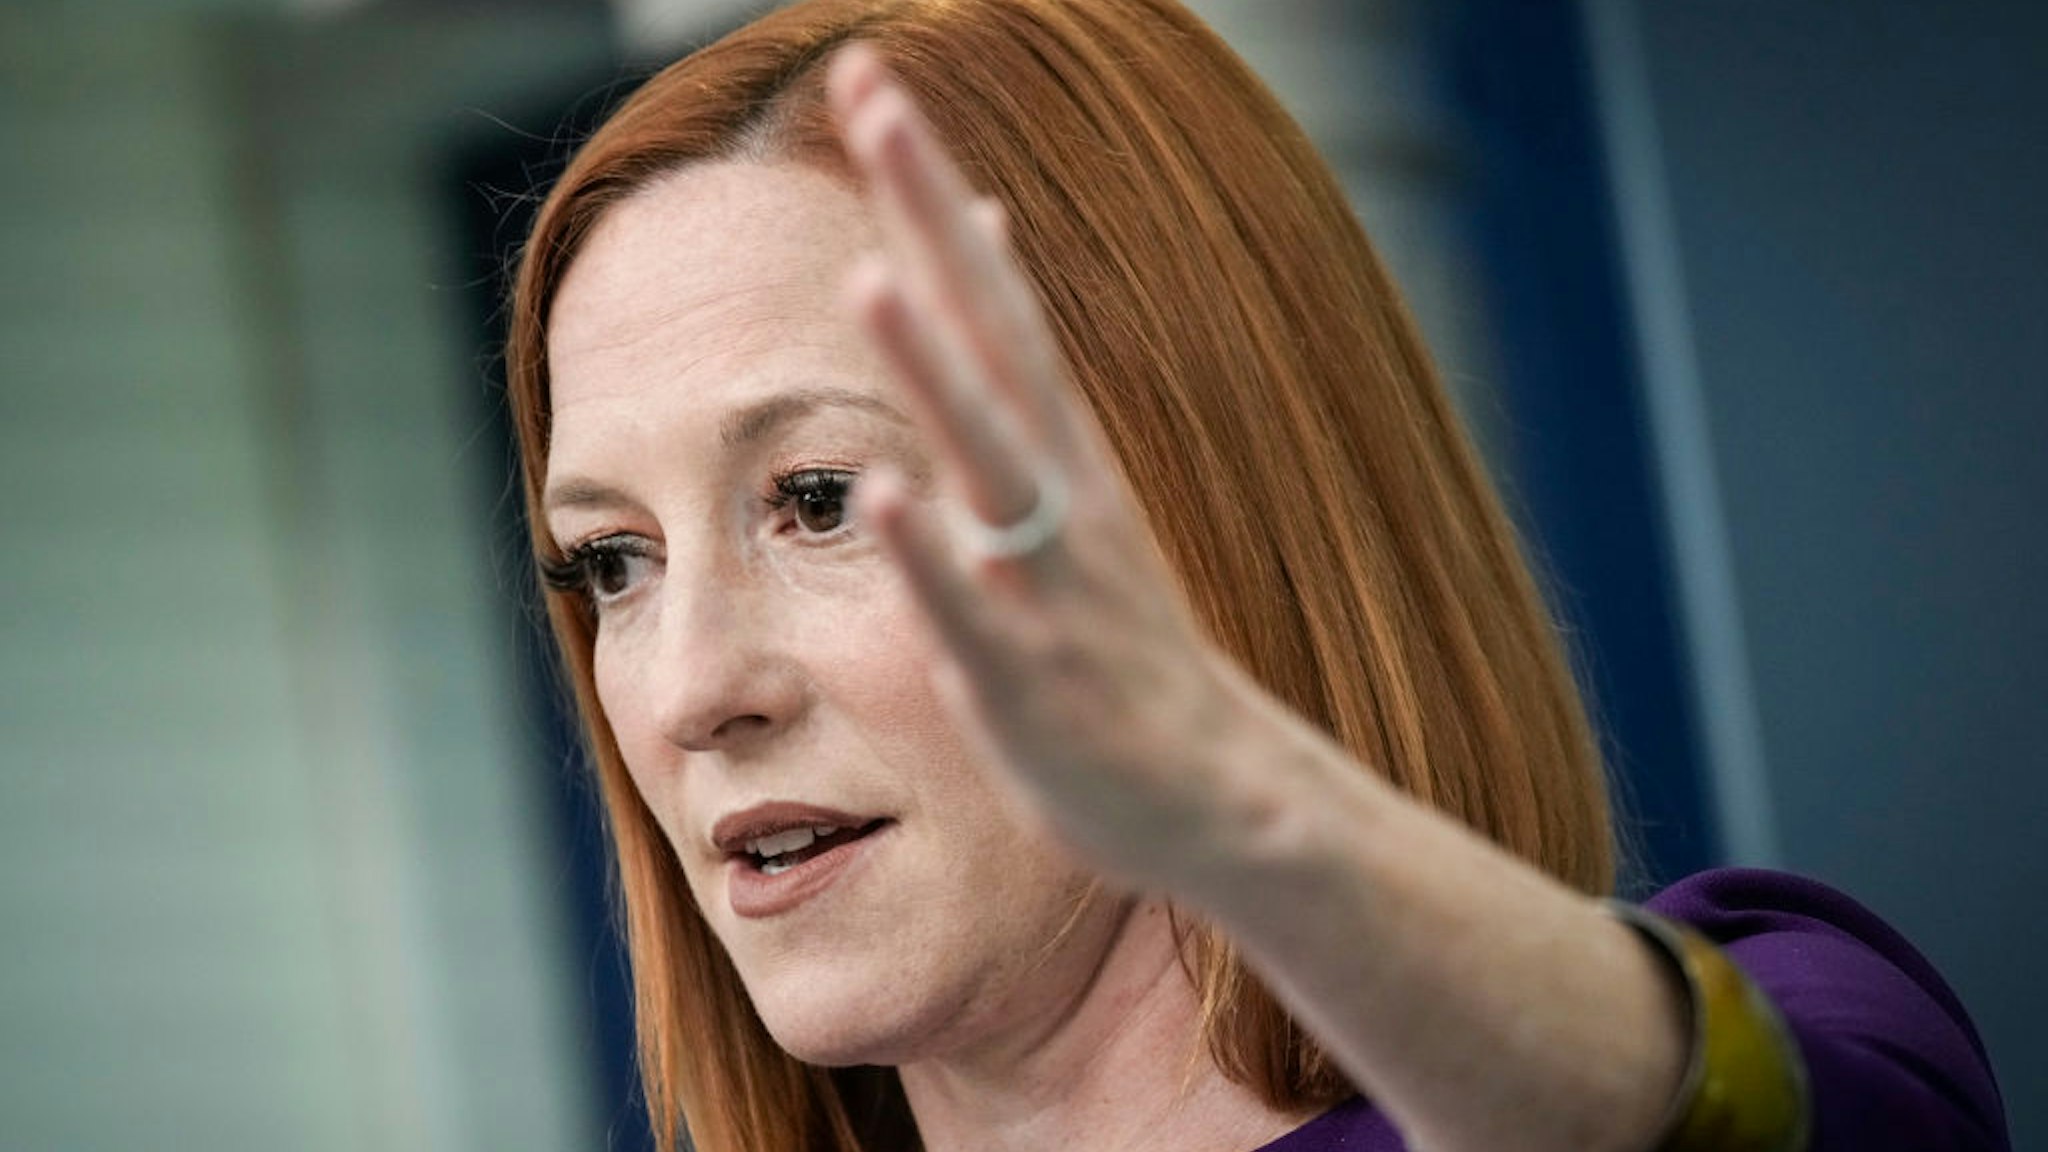 WASHINGTON, DC - MAY 10: White House Press Secretary Jen Psaki speaks during the daily press briefing at the White House on May 10, 2022 in Washington, DC. Earlier in the day, President Joe Biden delivered remarks on inflation and met with Italian Prime Minister Mario Draghi. (Photo by Drew Angerer/Getty Images)